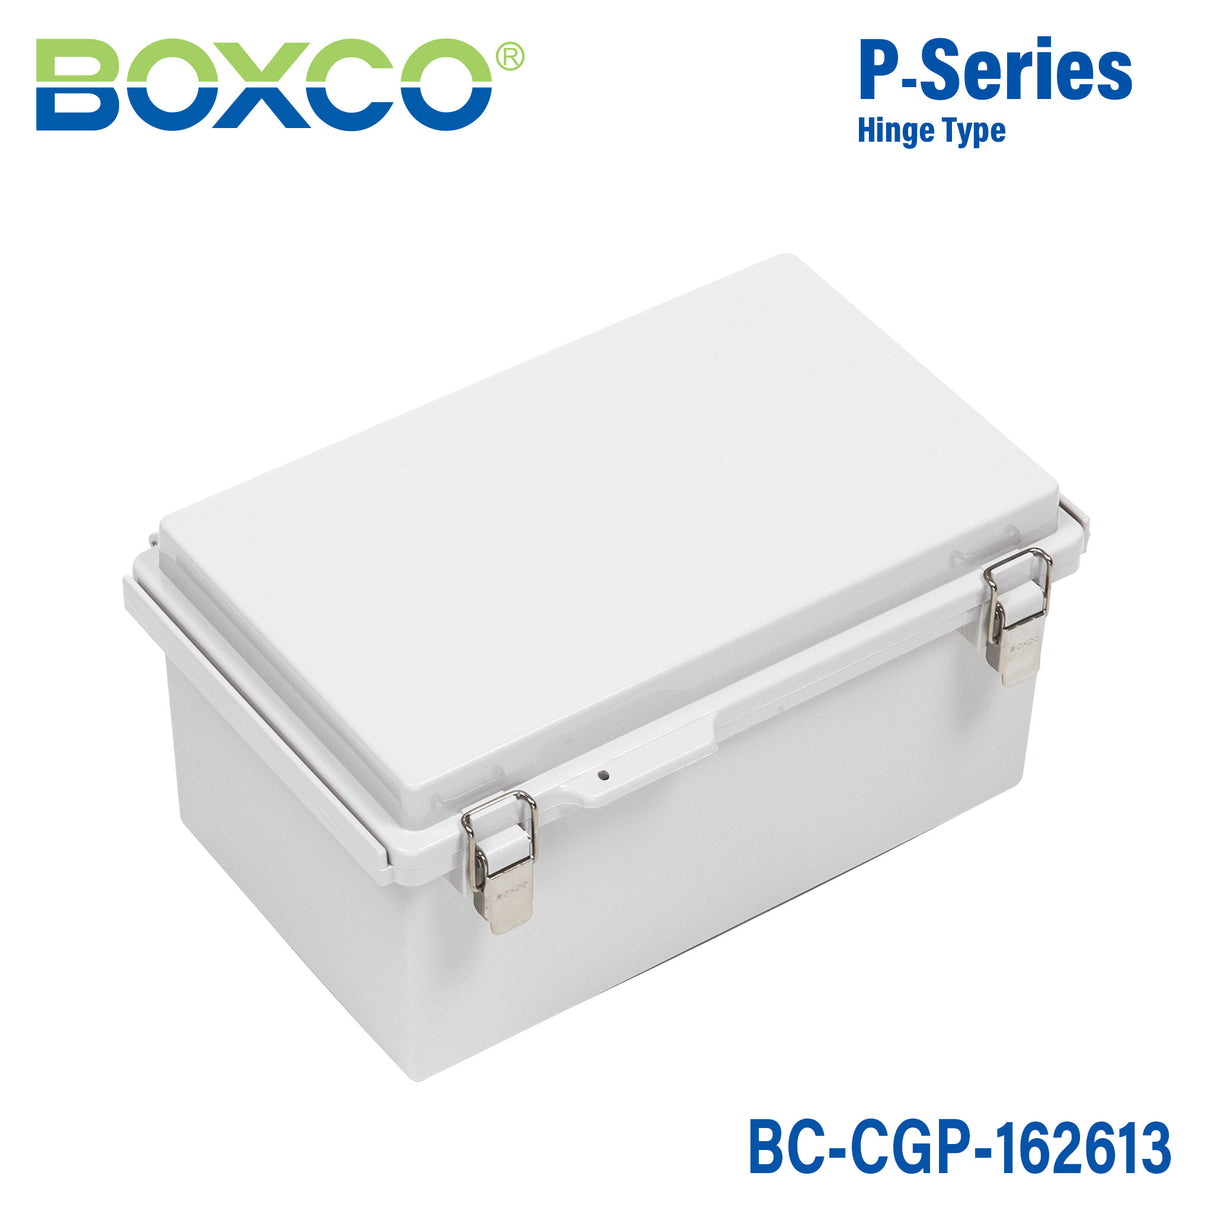 Boxco P-Series 160x260x130mm Plastic Enclosure, IP67, IK08, PC, Grey Cover, Molded Hinge and Latch Type